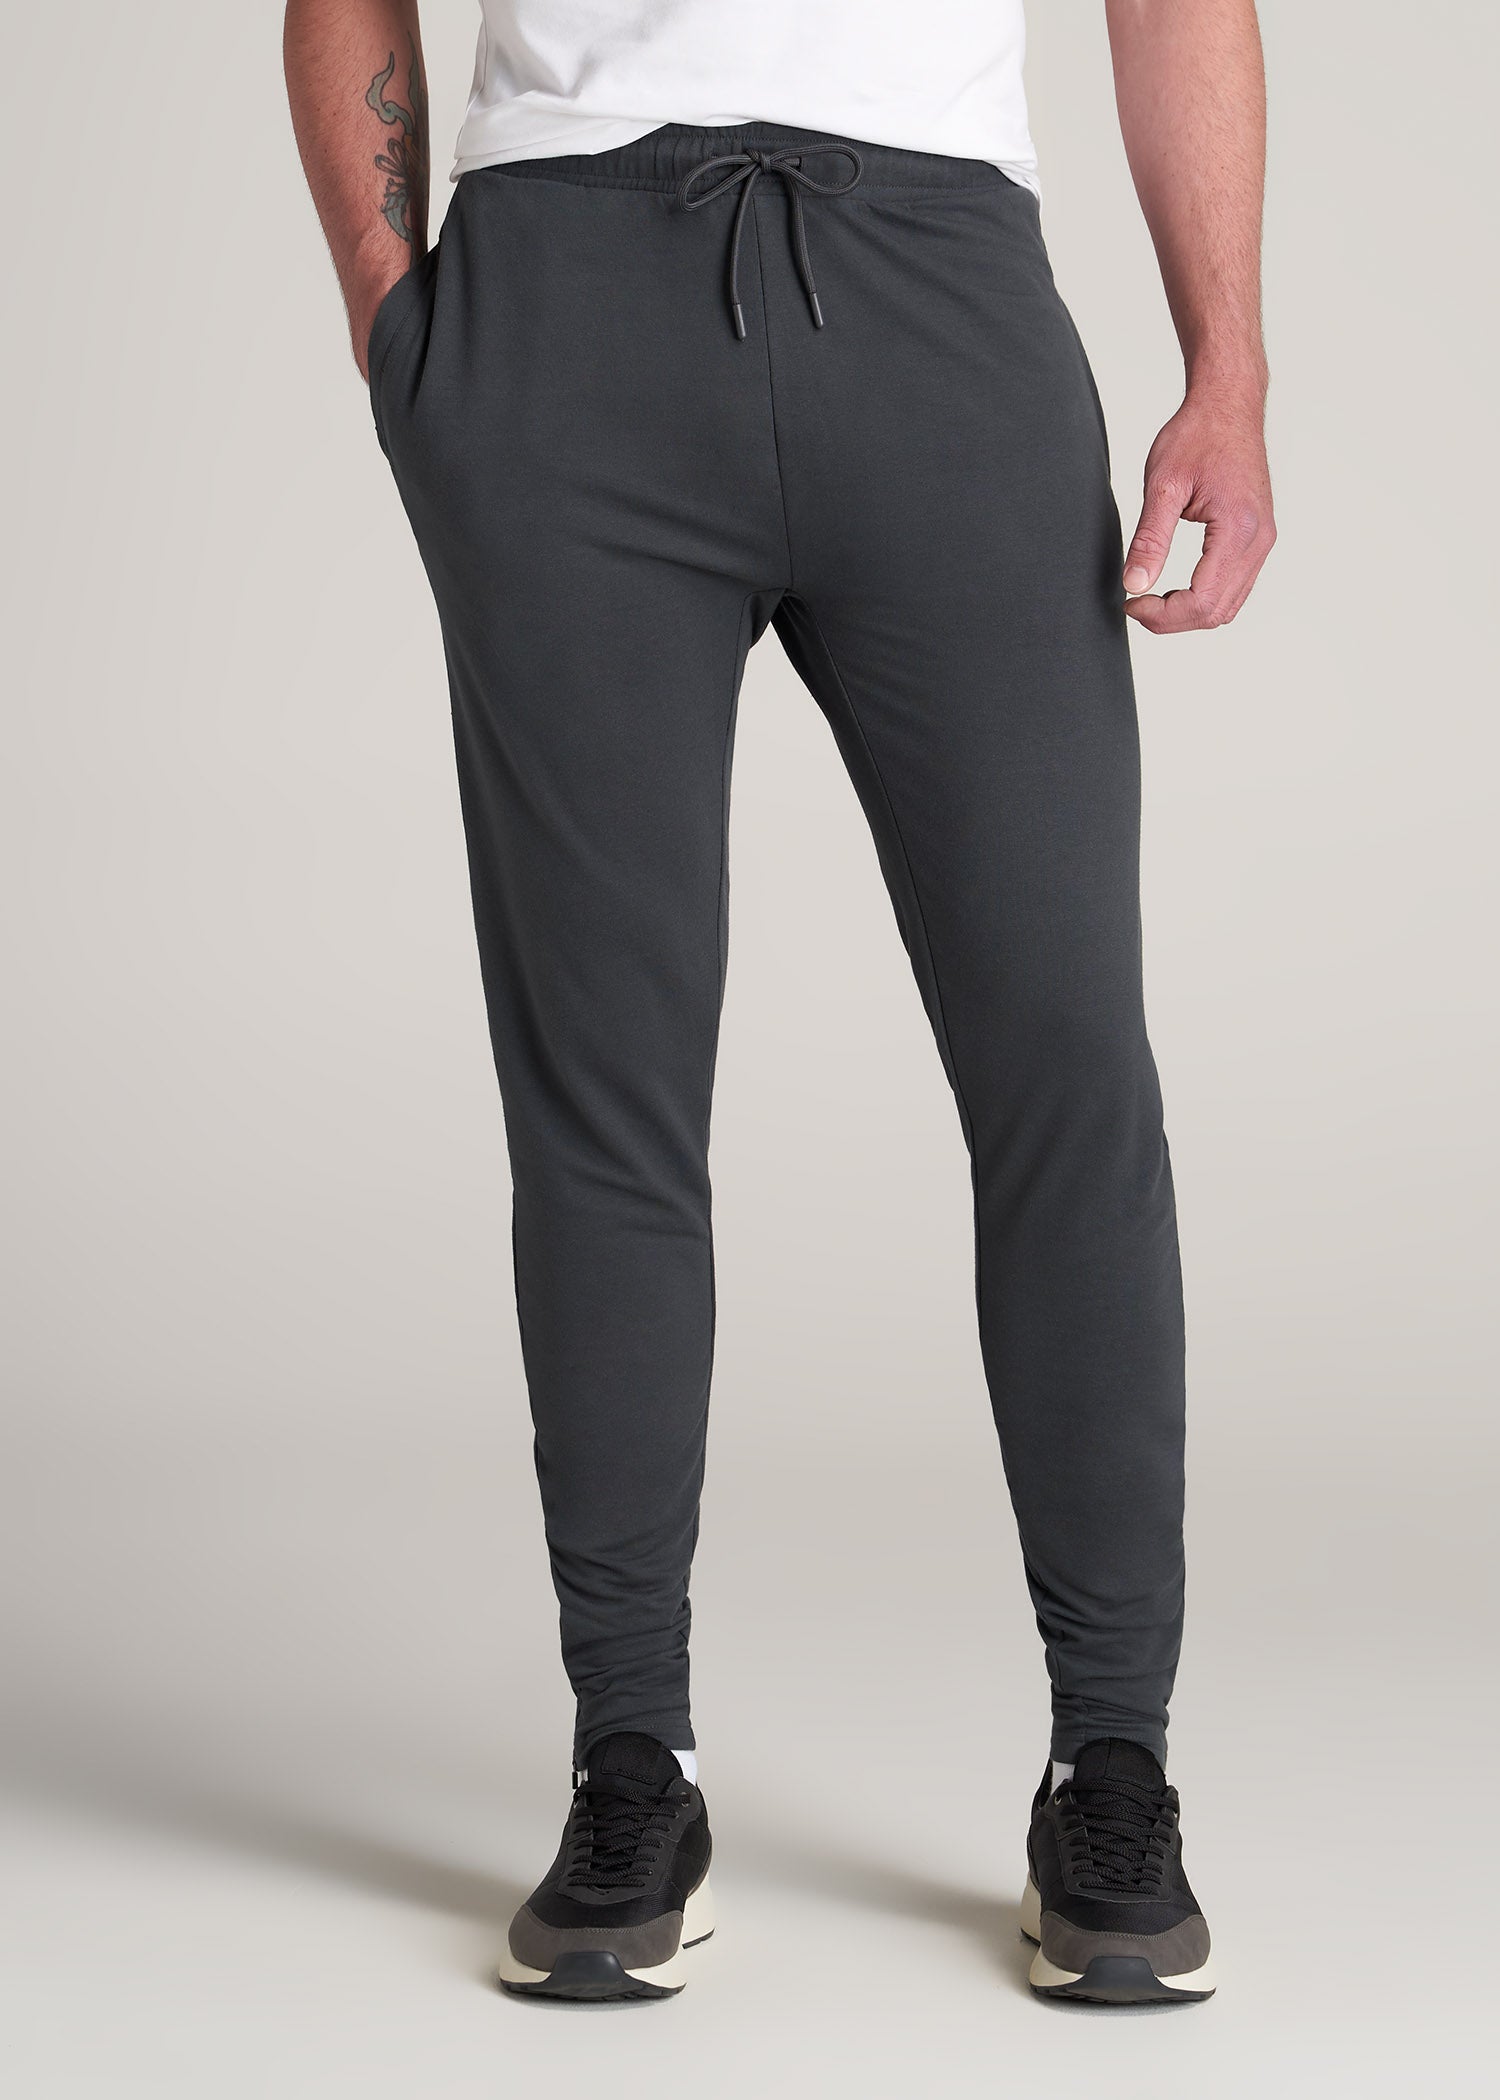 SLIM-FIT Lightweight French Terry Joggers for Tall Men in Iron Grey